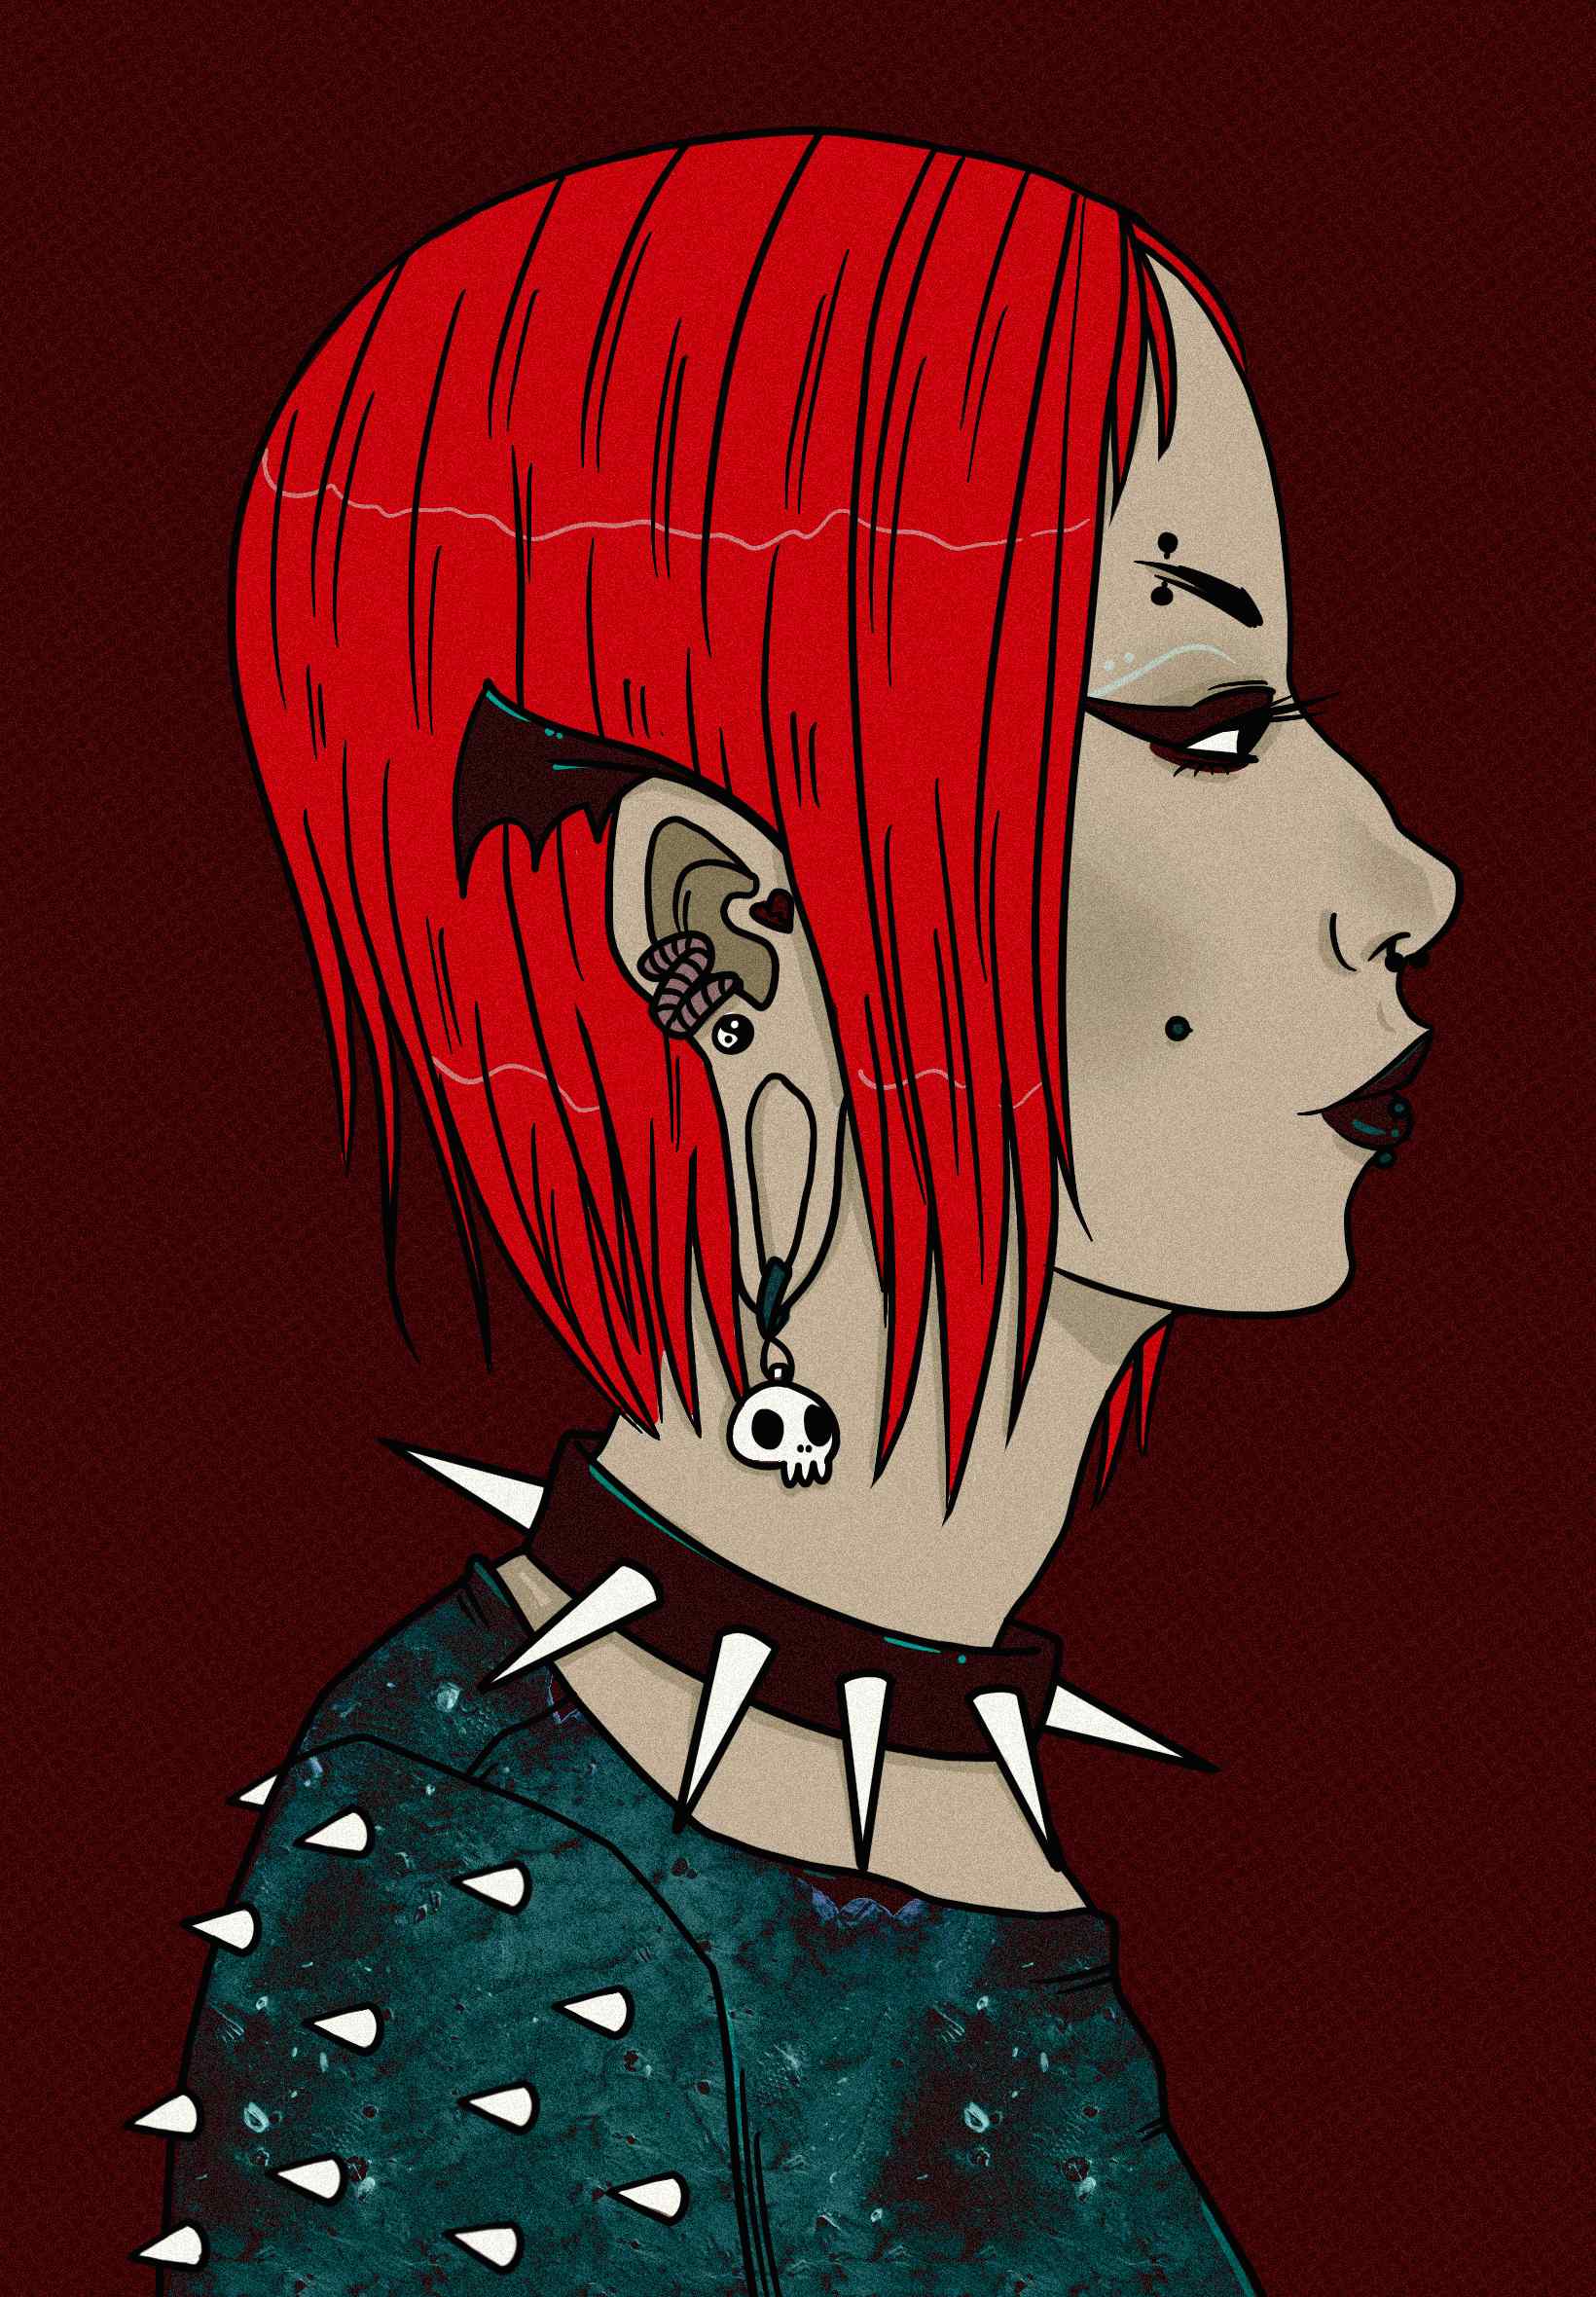 digital color cartoon style portrait of a woman with bright red hair, a spiked shirt, and spiked collar.